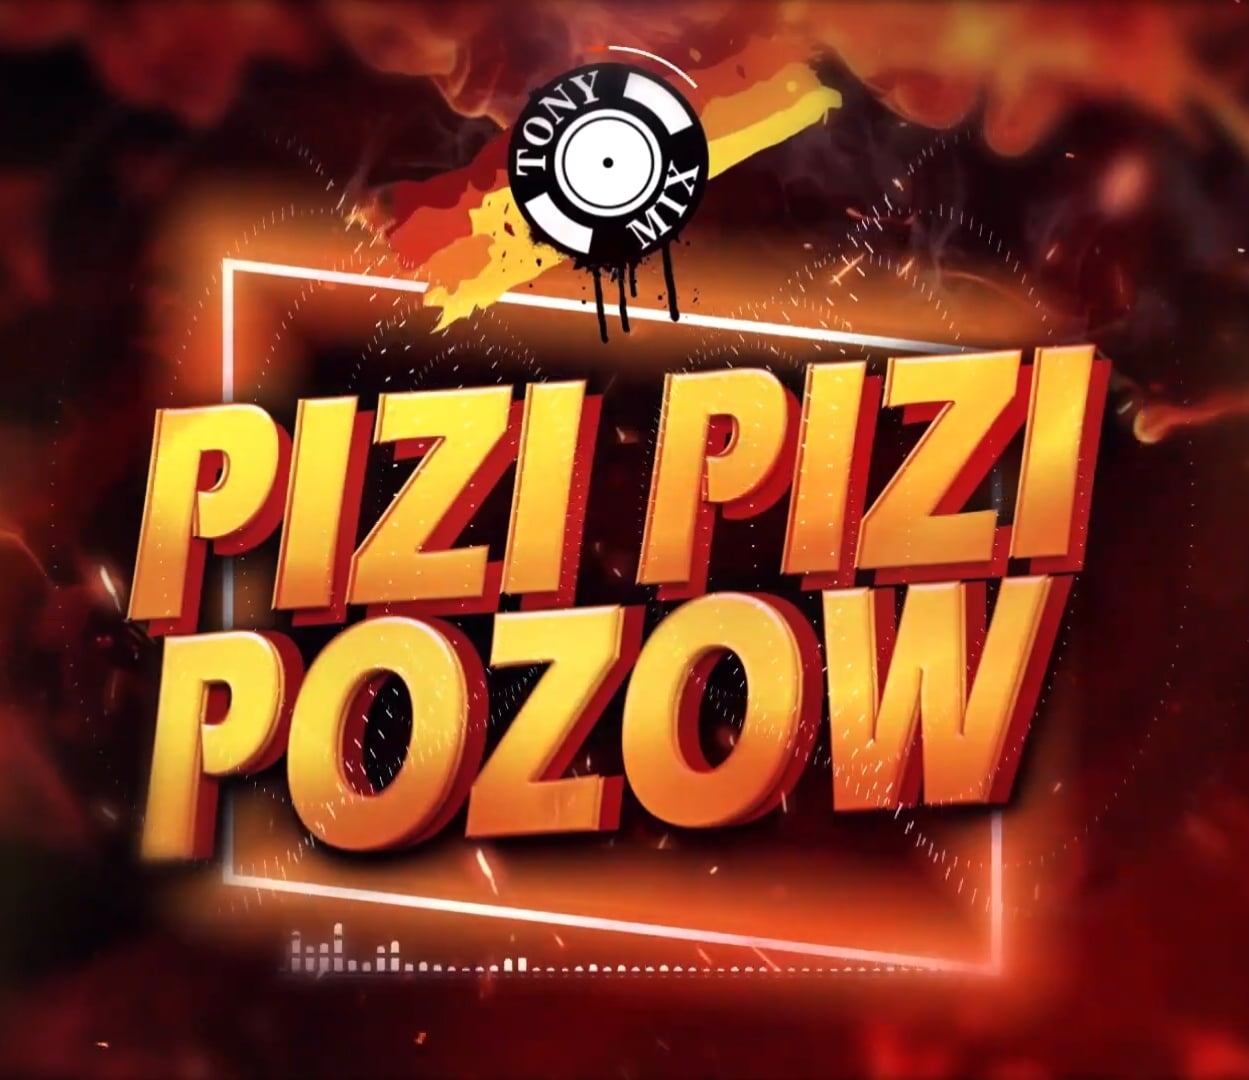 TonyMix Pizi Pizi Pozow Tonymix pizi pizi pozow DOWNLOAD MP3